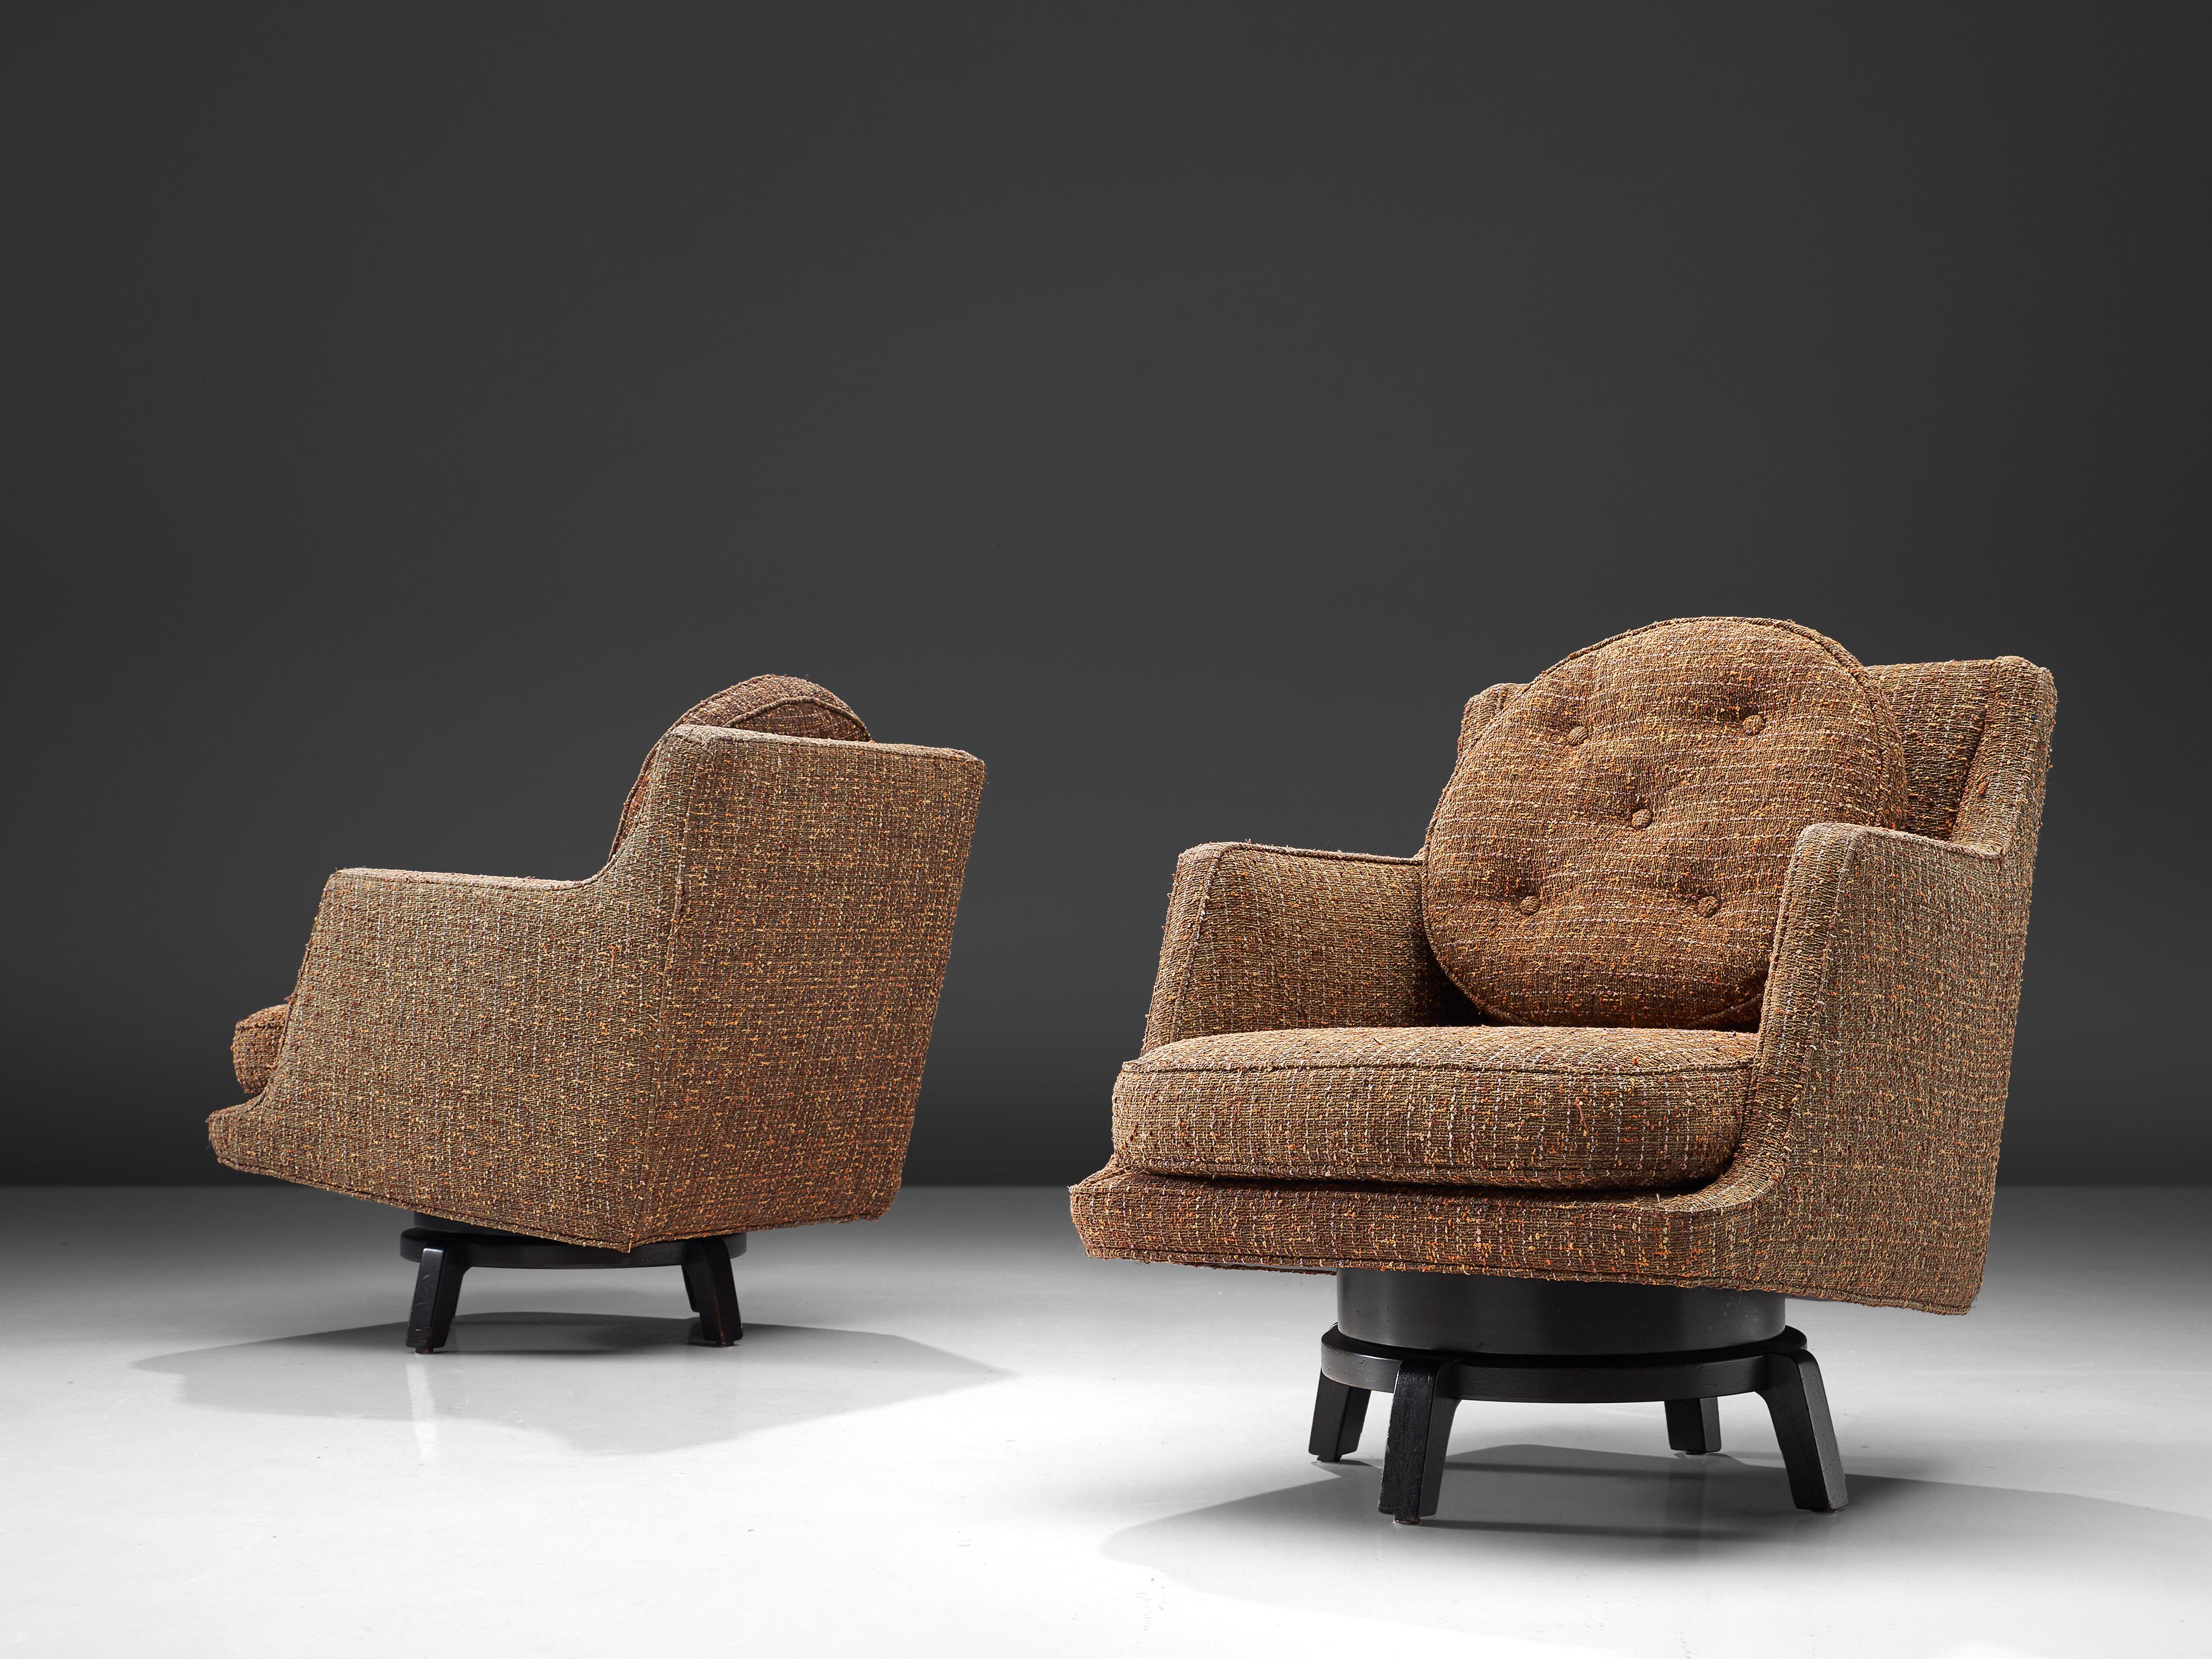 Edward Wormley, swivel lounge chairs model 5609, fabric, mahogany, United States, 1950s

These lounge chairs by Edward Wormley feature are a combination of a traditional designed seat with a wooden base that holds more playful aesthetics. The chairs